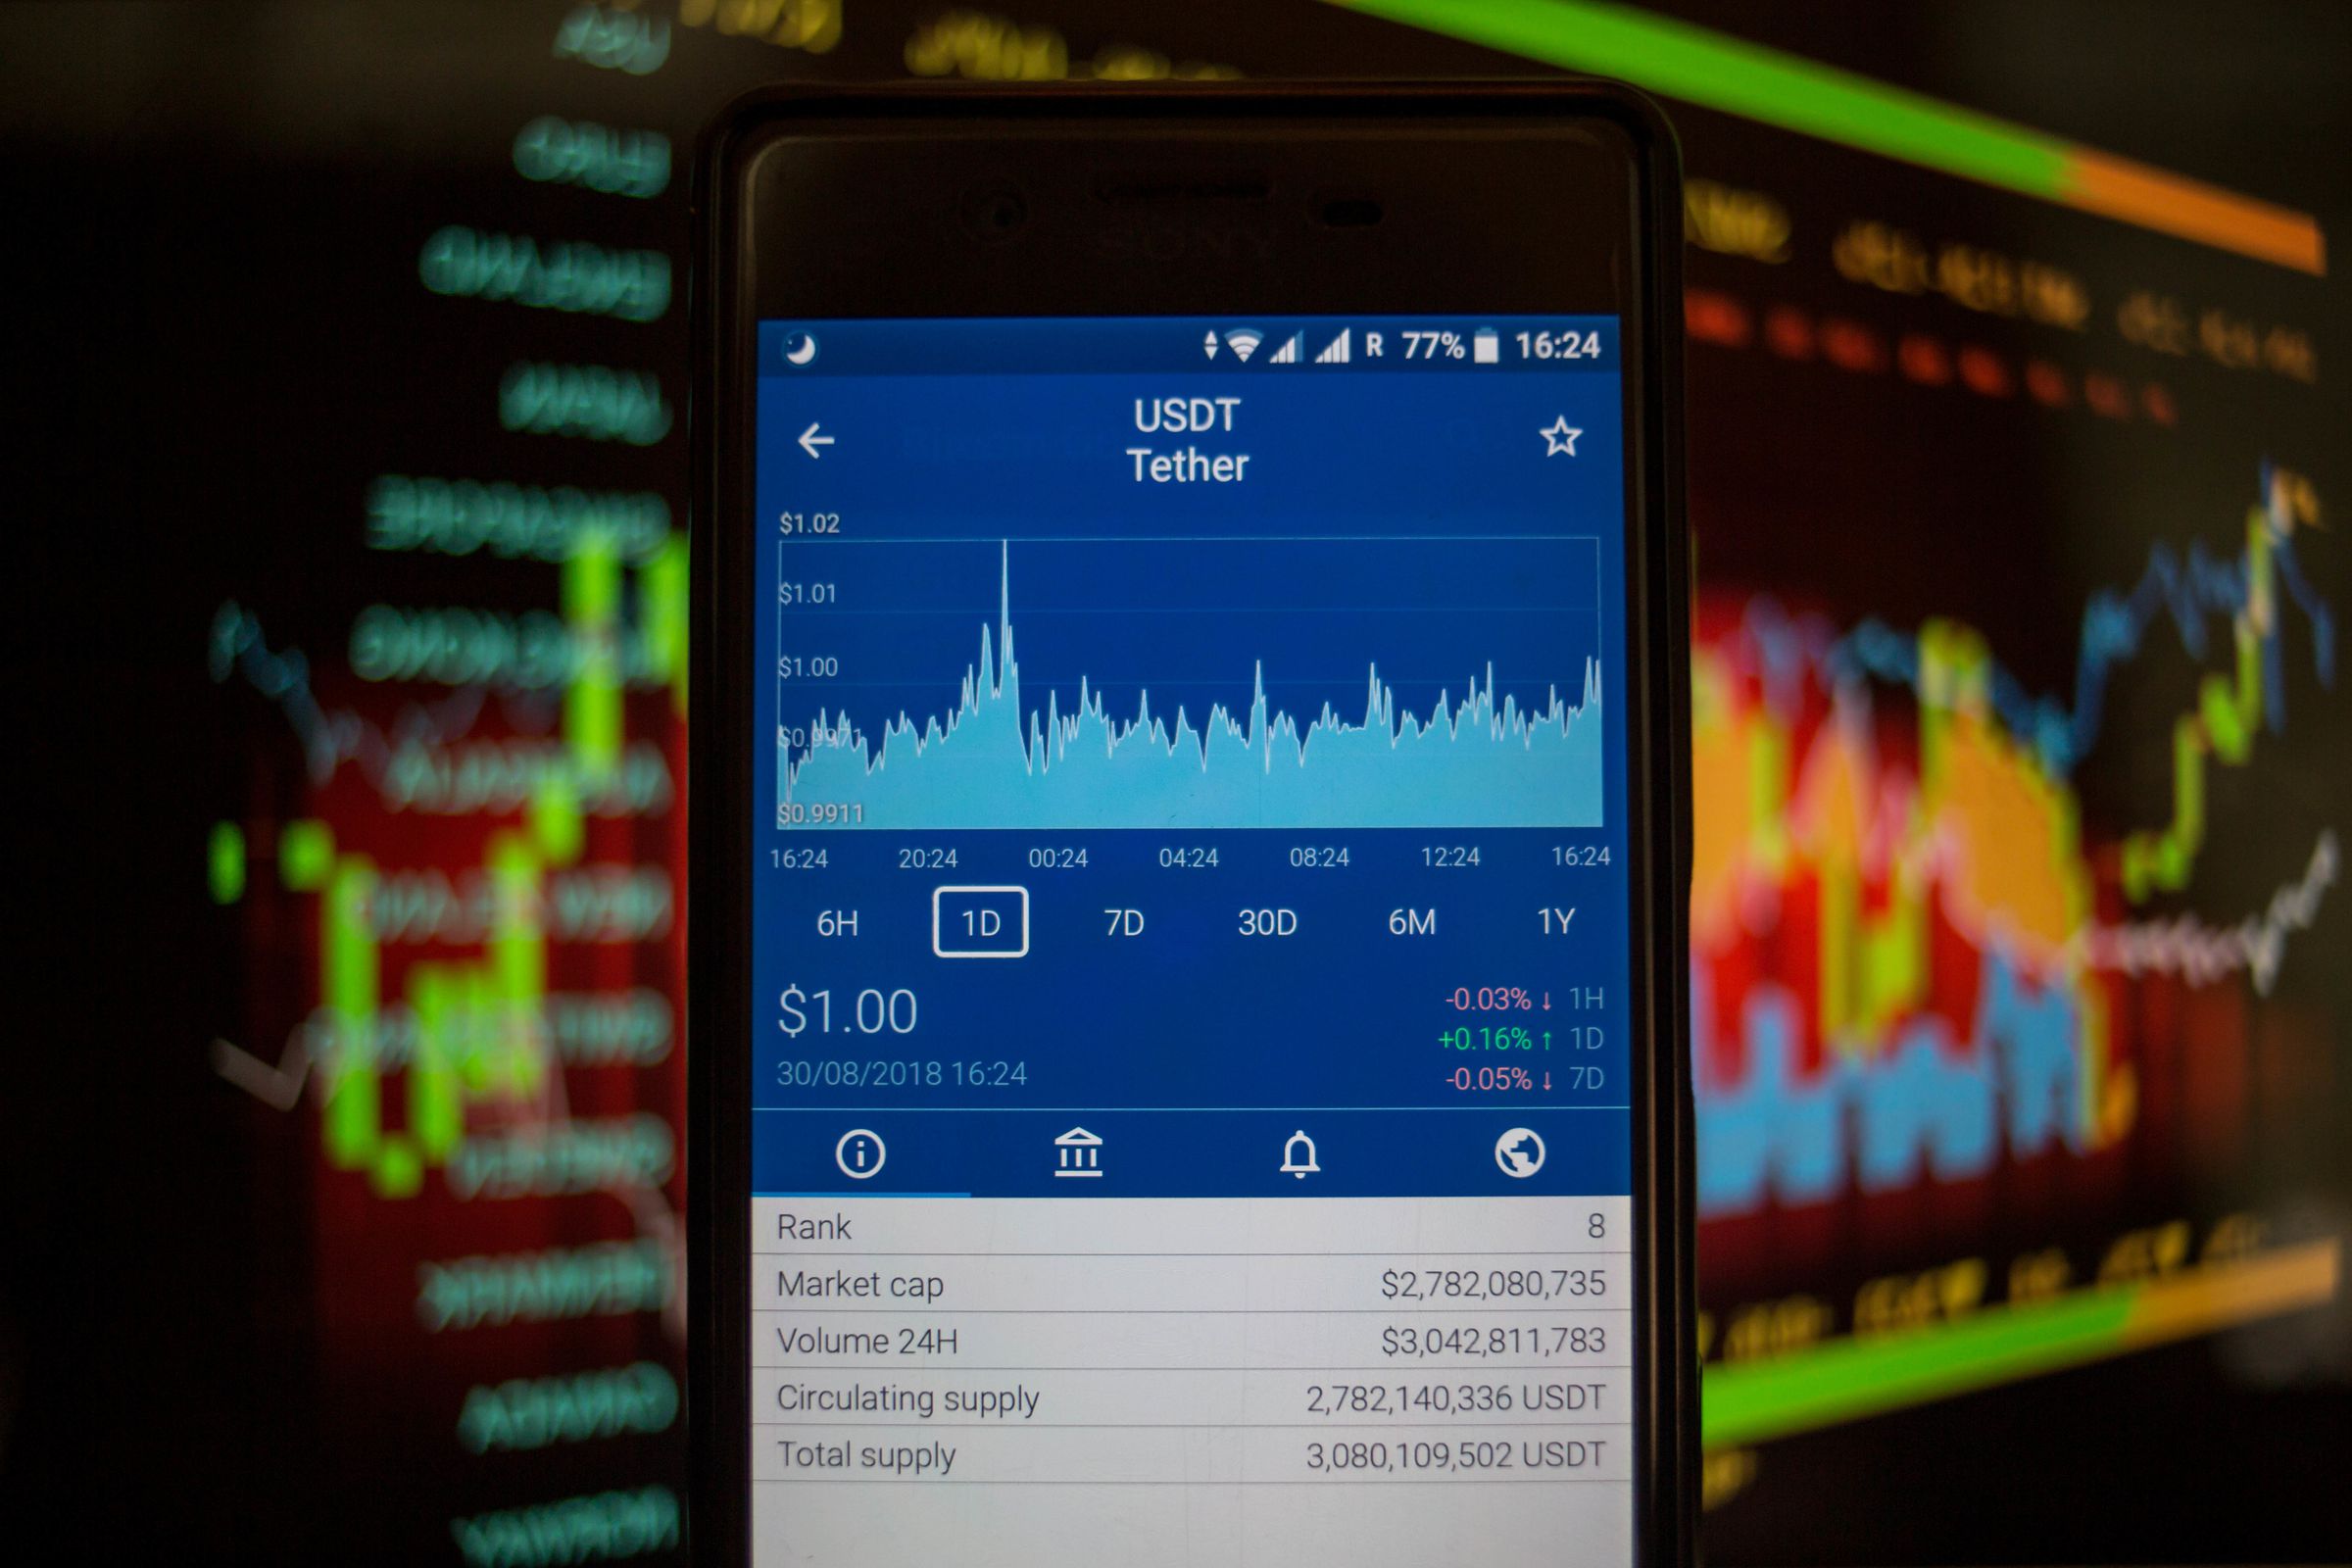 A smartphone displays the Tether market value on the stock